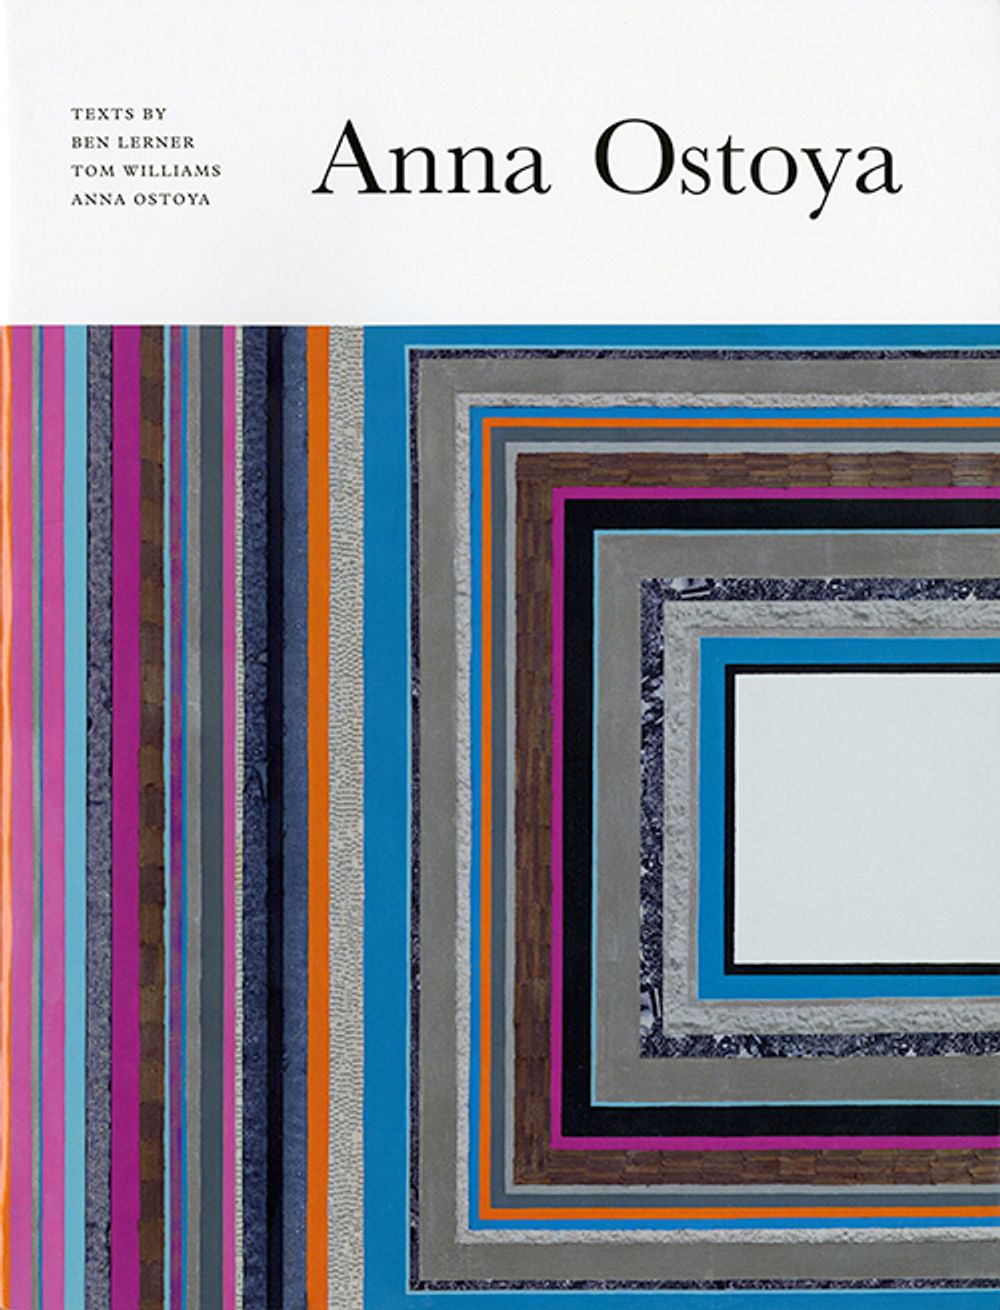 Book cover on plain gray background with title of Anna Ostoya